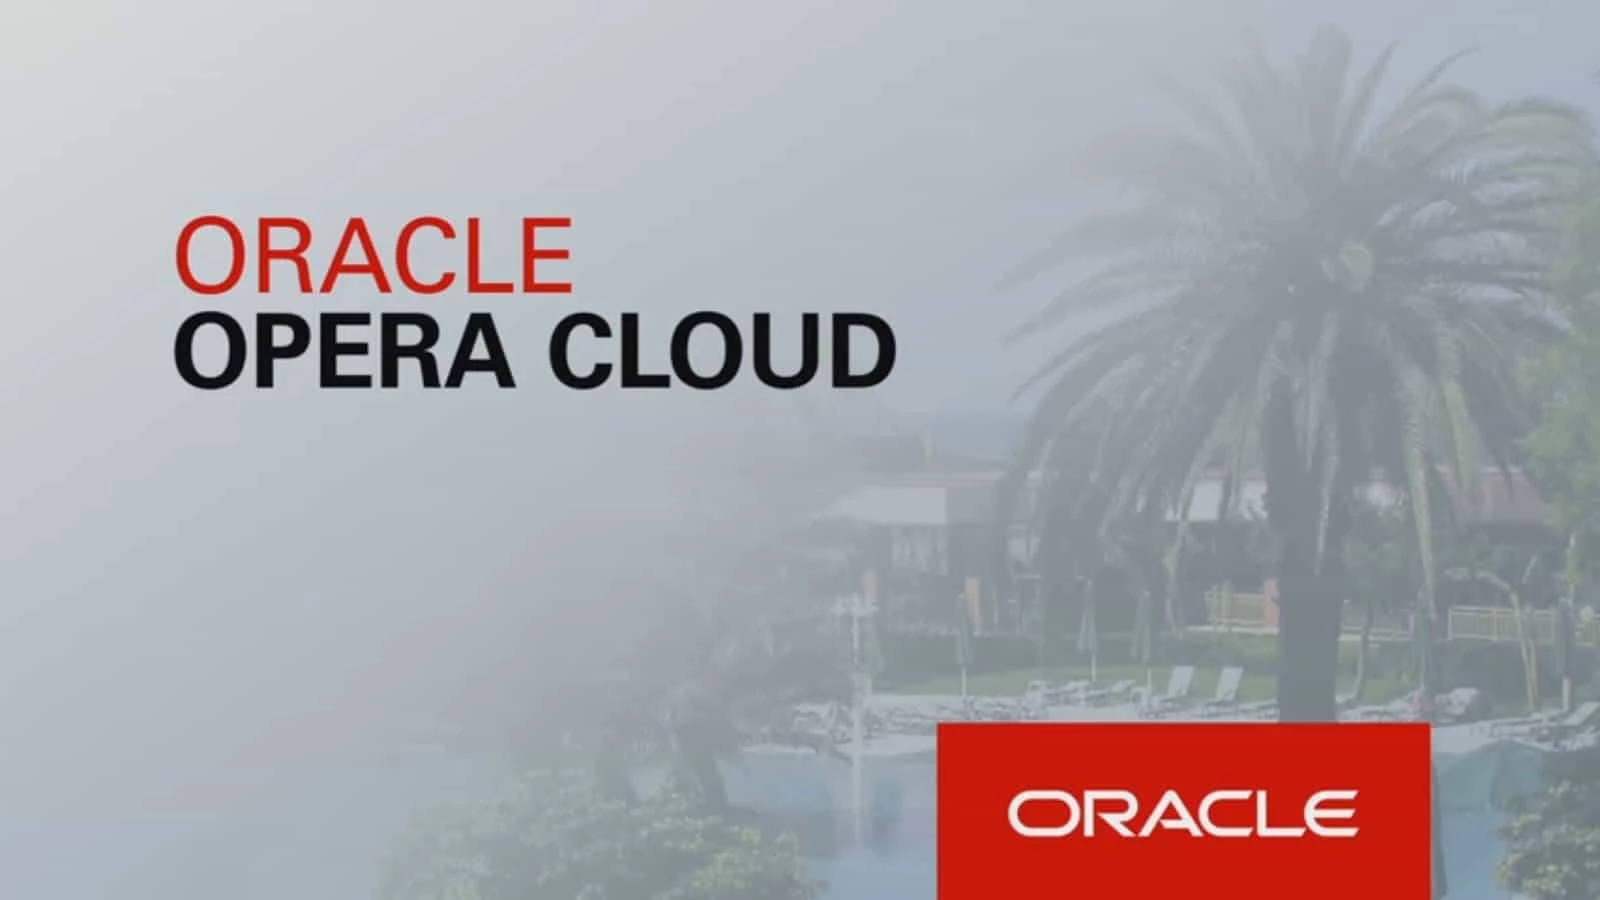 IPERA Starling Cloud Is Certified with Oracle Opera PMS Cloud